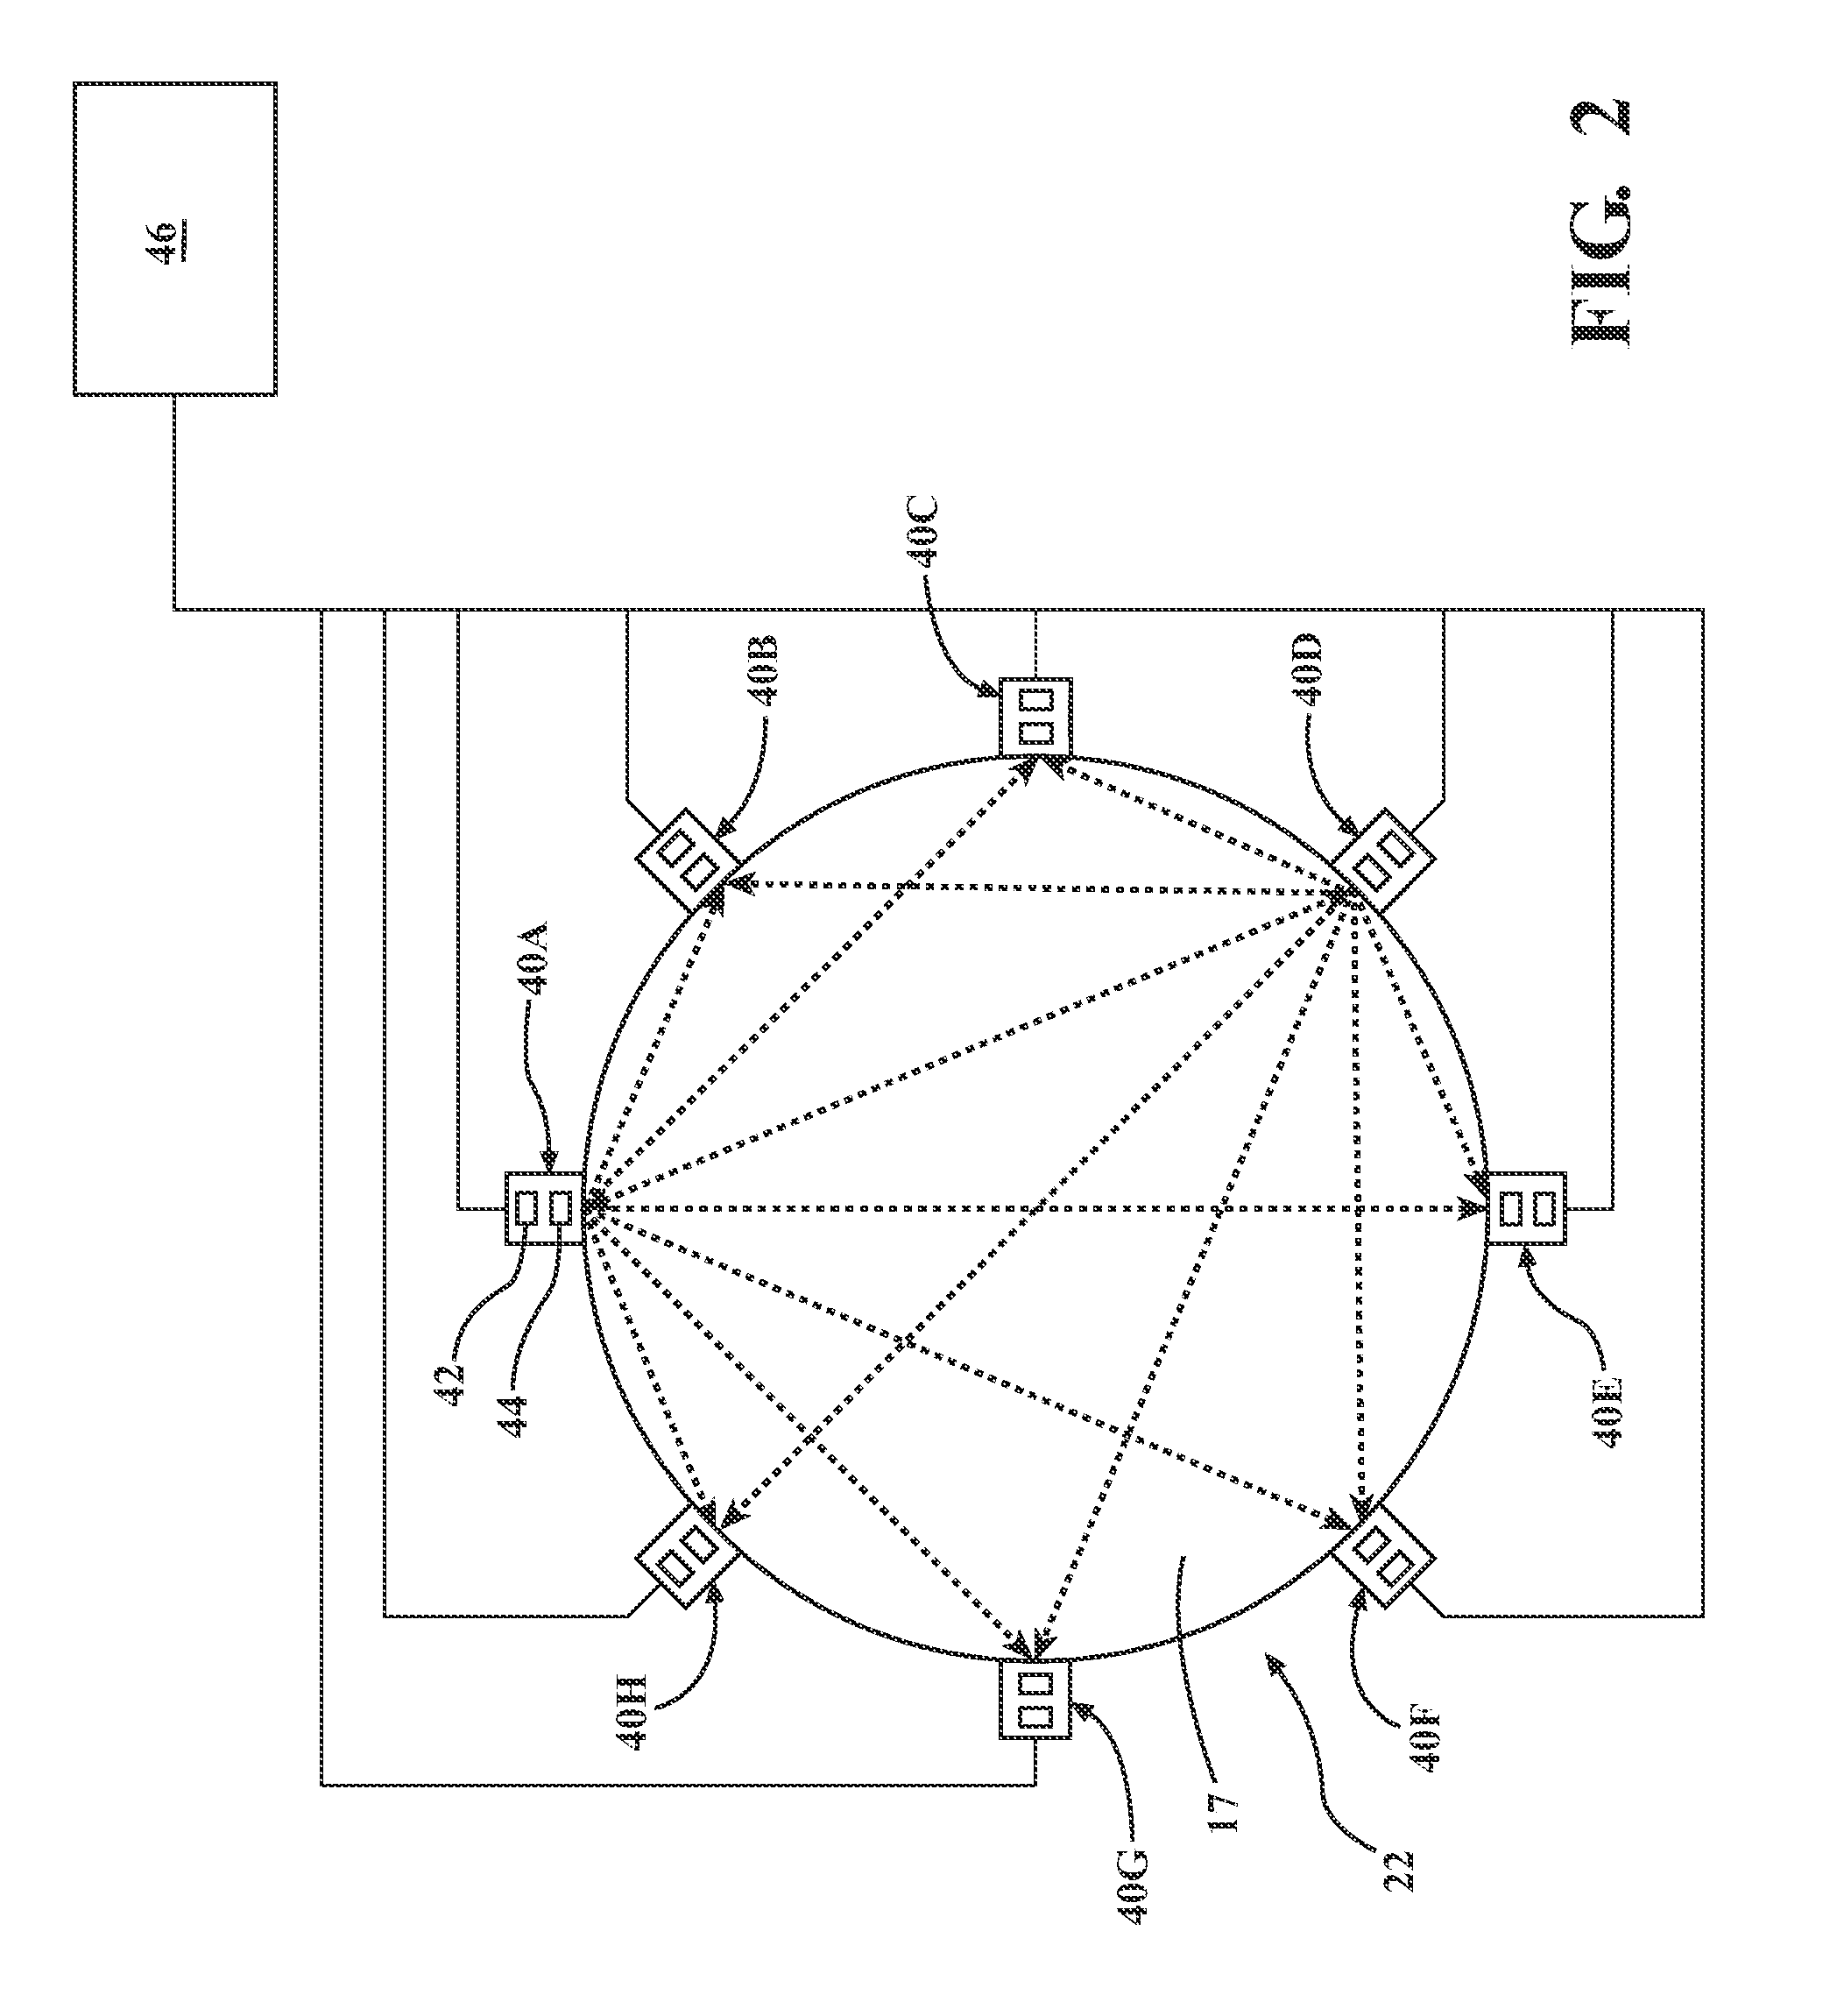 Acoustic transducer in system for gas temperature measurement in gas turbine engine